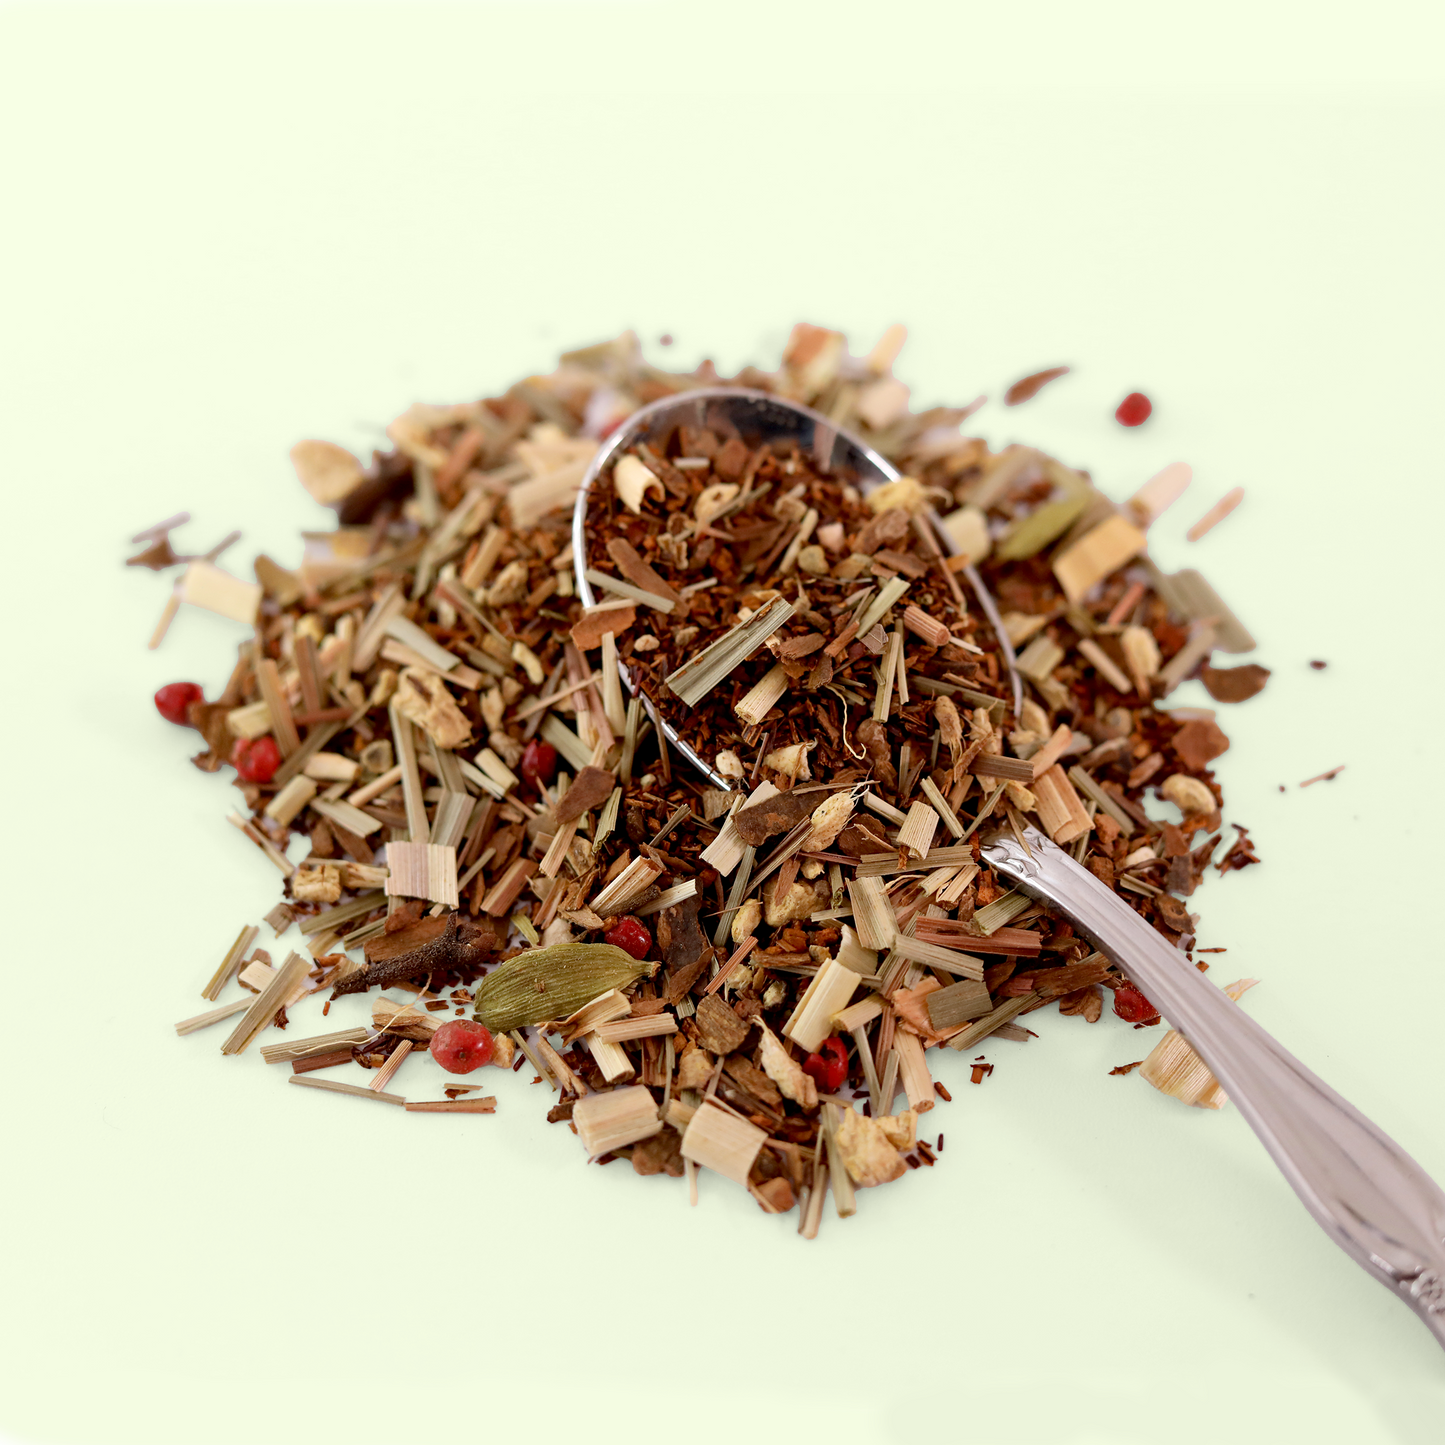  A close-up view of a pile of dried Evensong Chai tea leaves. A metal spoon is visible, scooping up some of the tea blend. A Good Store product.